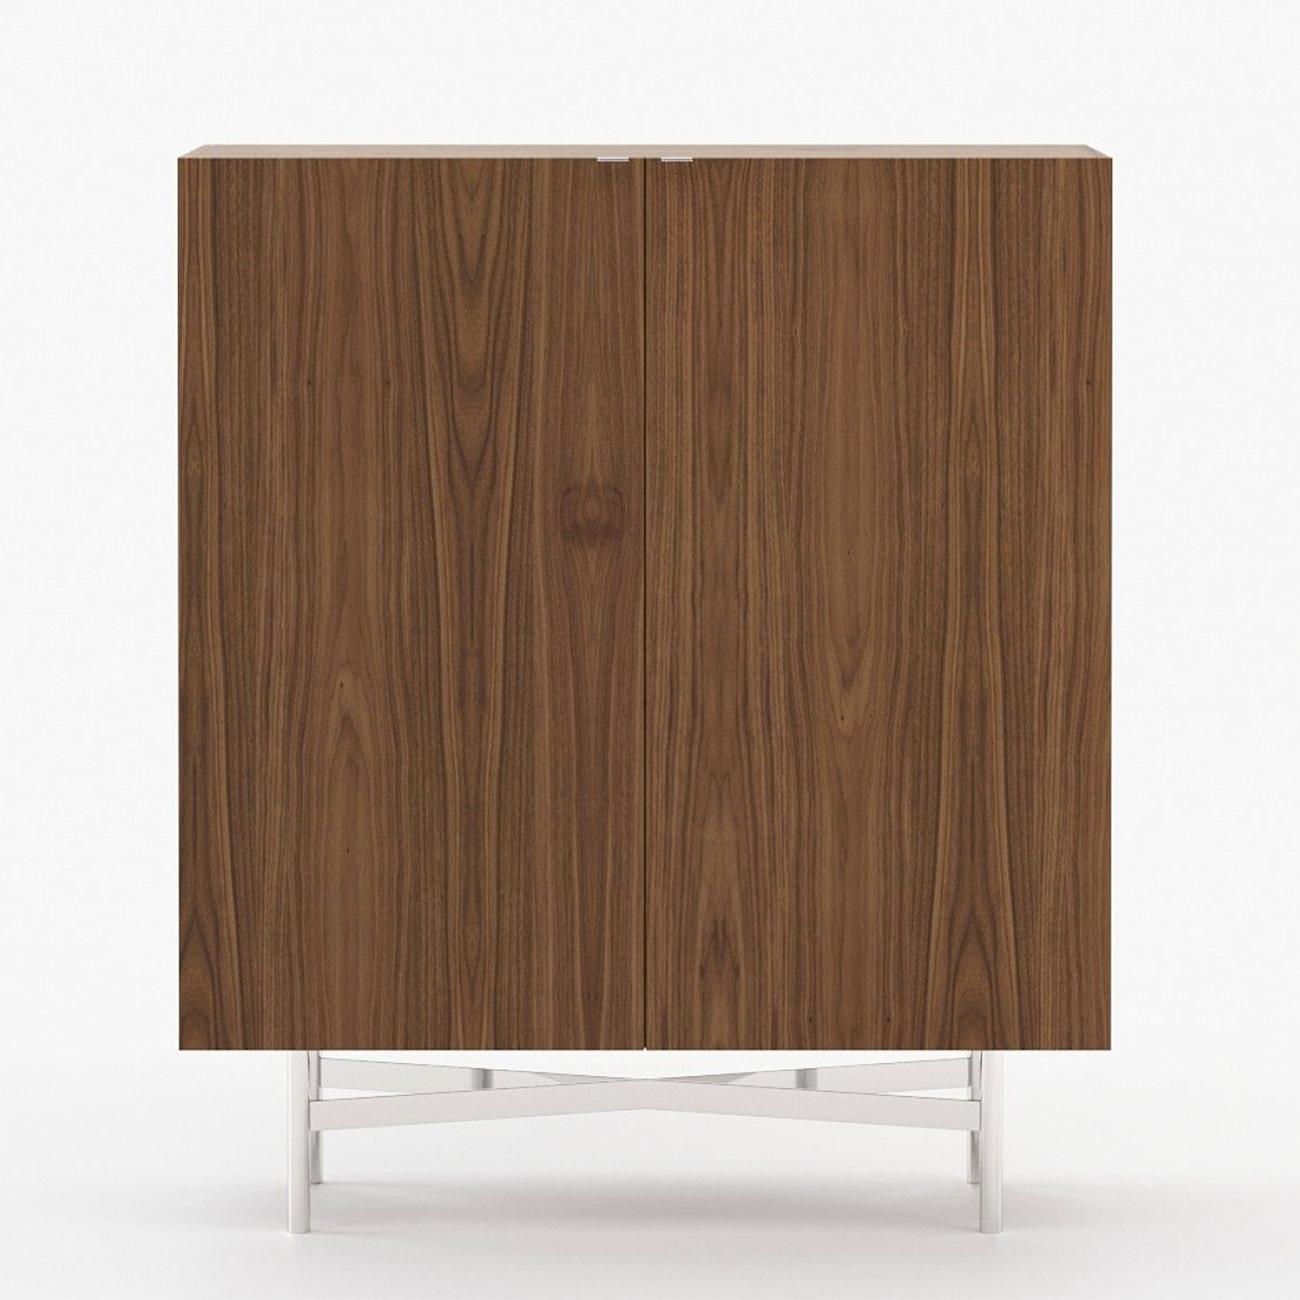 Bar cabinet randy with polished stainless steel structure
and handles and with structure in wood in walnut matte finish. 
With 2 doors and with 6 compartments inside.
Also available on request in grey oak matte, or in natural oak, or in
ebony